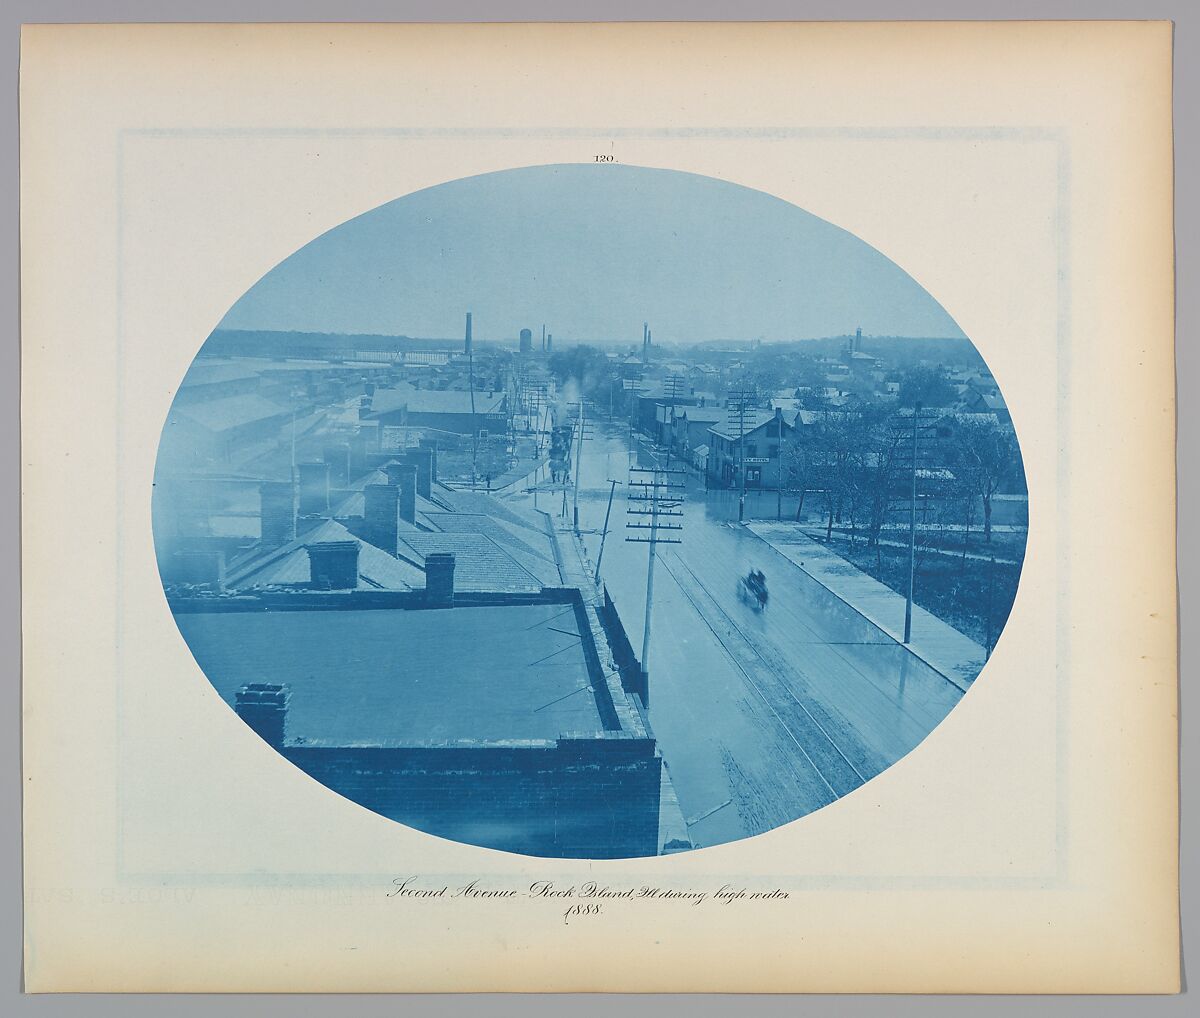 Second Ave Rock Island, Ill. during high water, Henry P. Bosse, Cyanotype